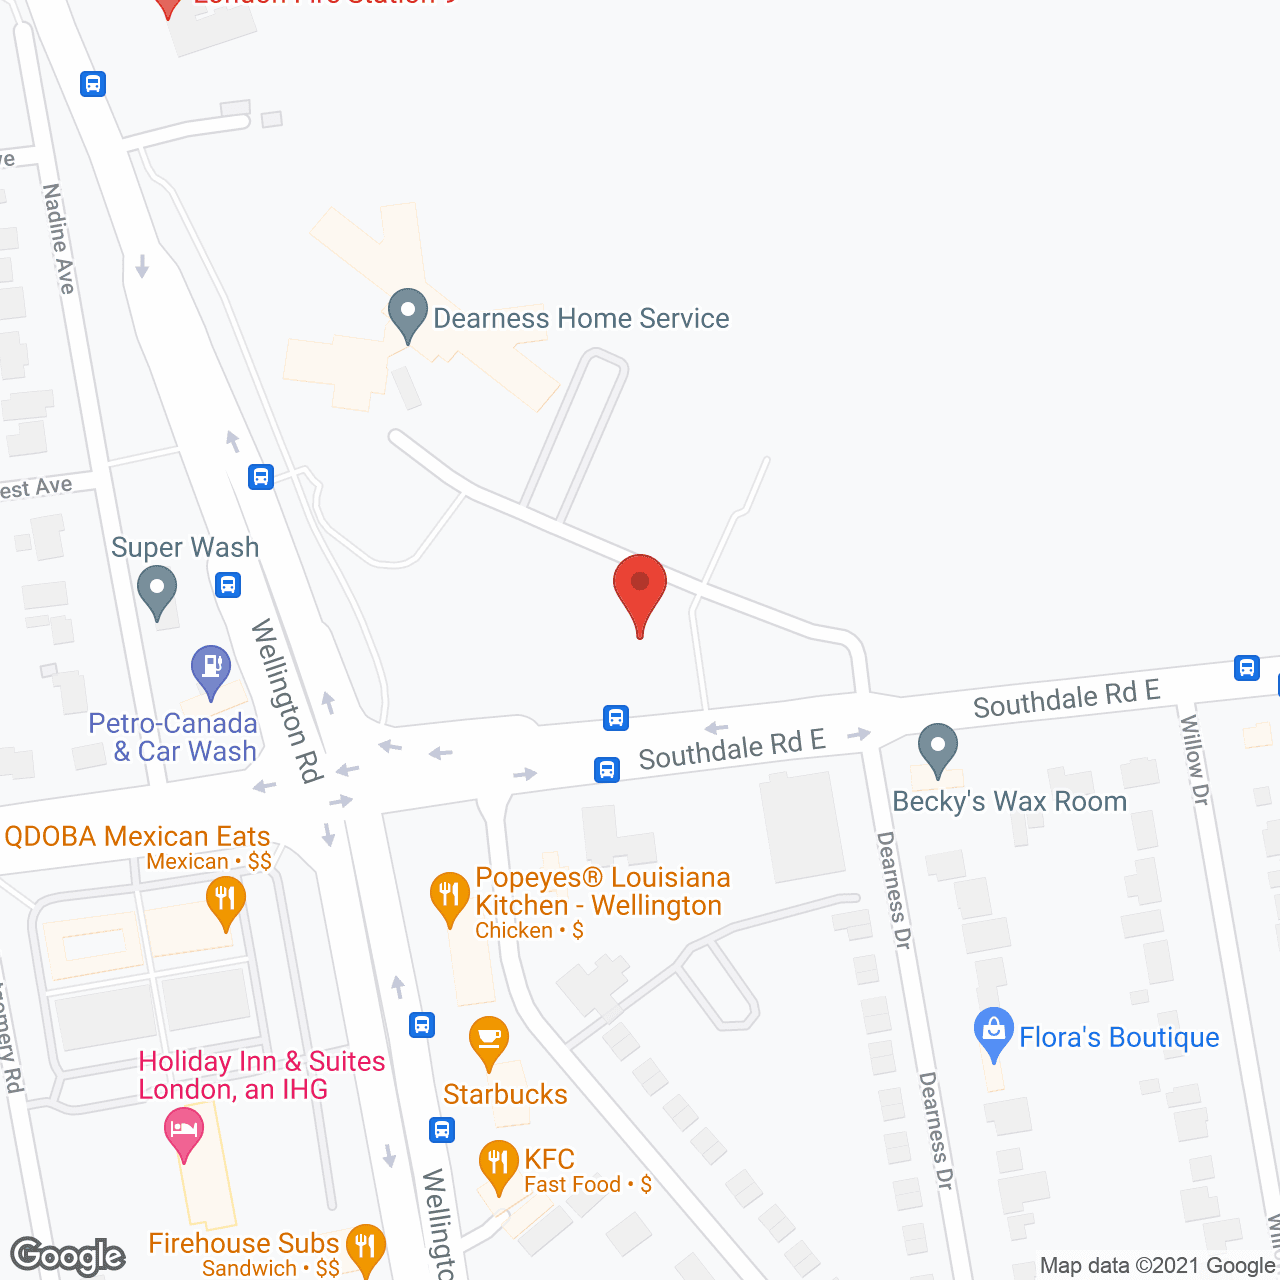 Dearness Services in google map